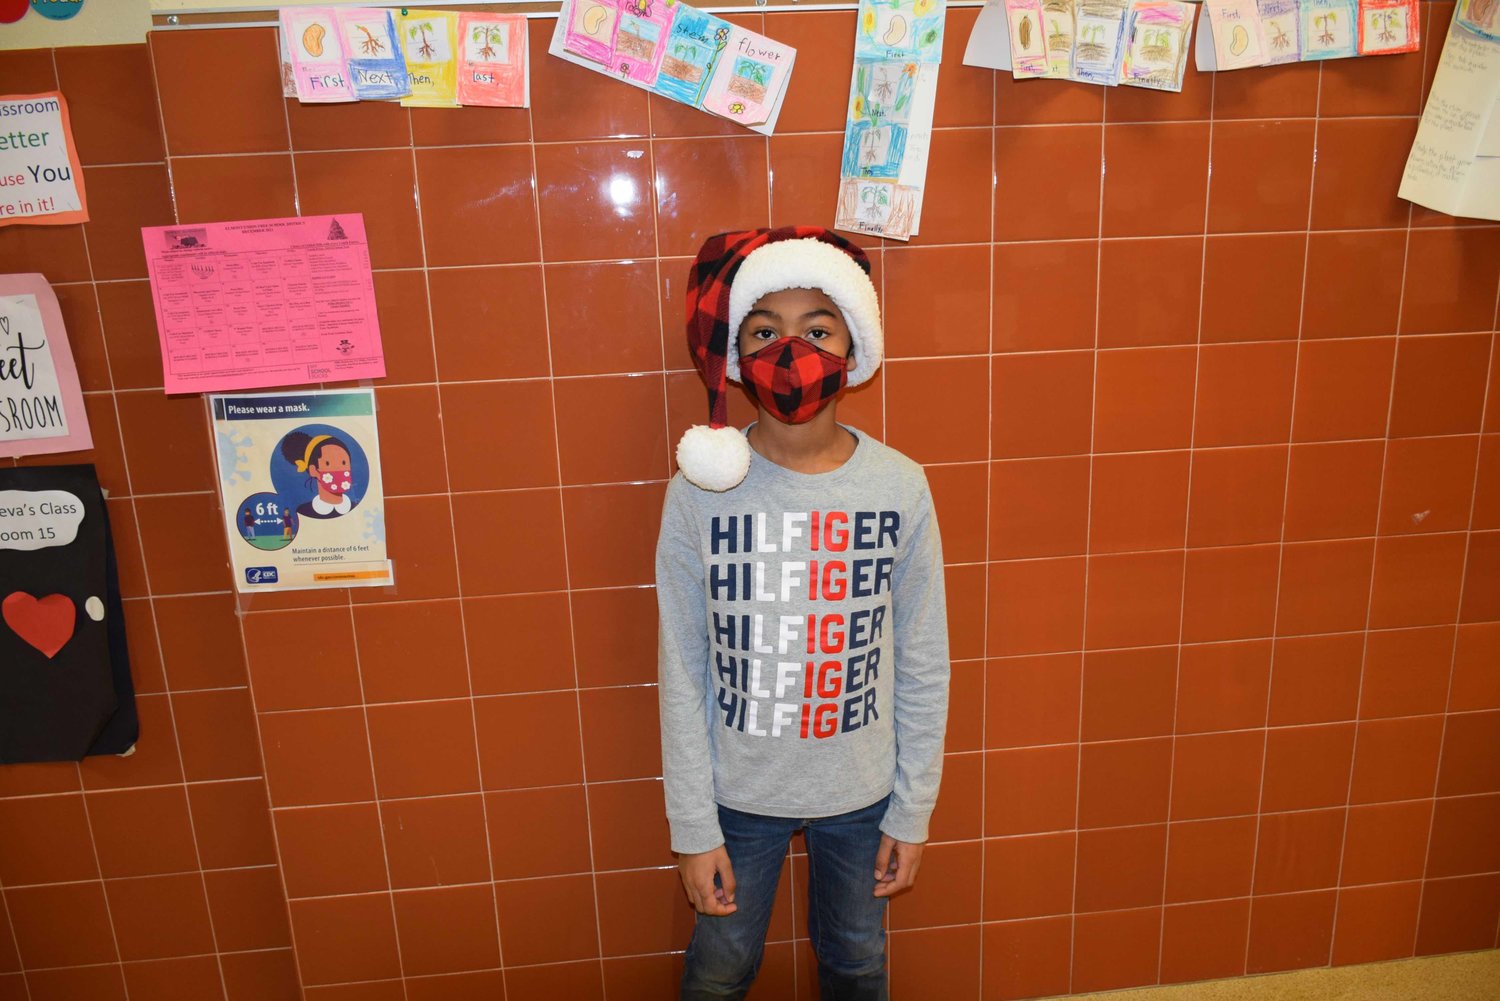 Students at Alden Terrace School dressed in holiday attire for the Dec. 21 event, which was held via Zoom.